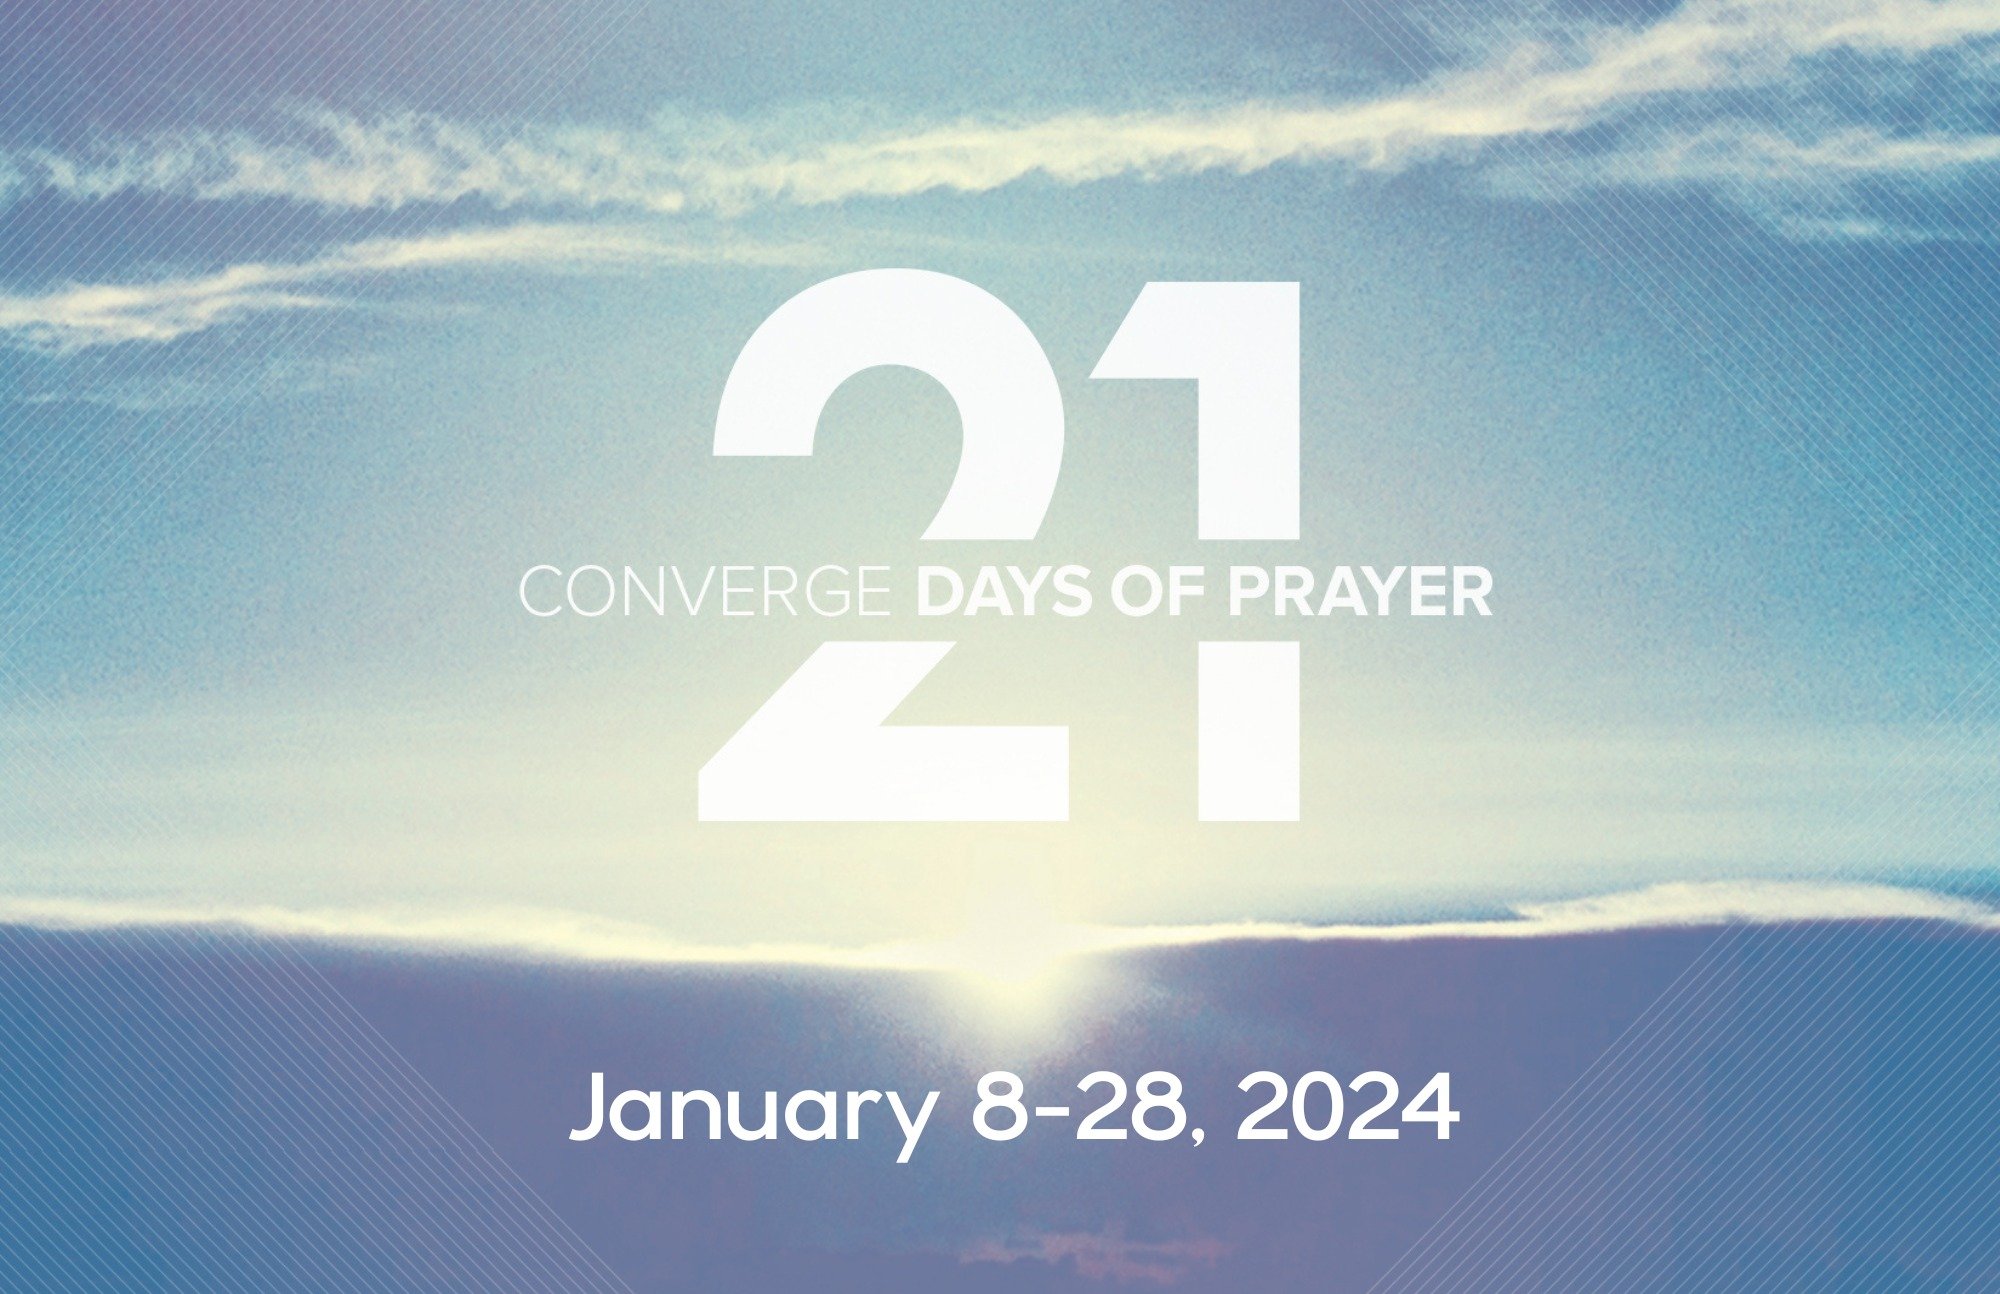 We invite you, to join us this January in 21 Days of Prayer. What breakthrough are you seeking?

God&rsquo;s people all over the world have been seeking spiritual breakthroughs through prayer and fasting since the birth of the church. What is the gre